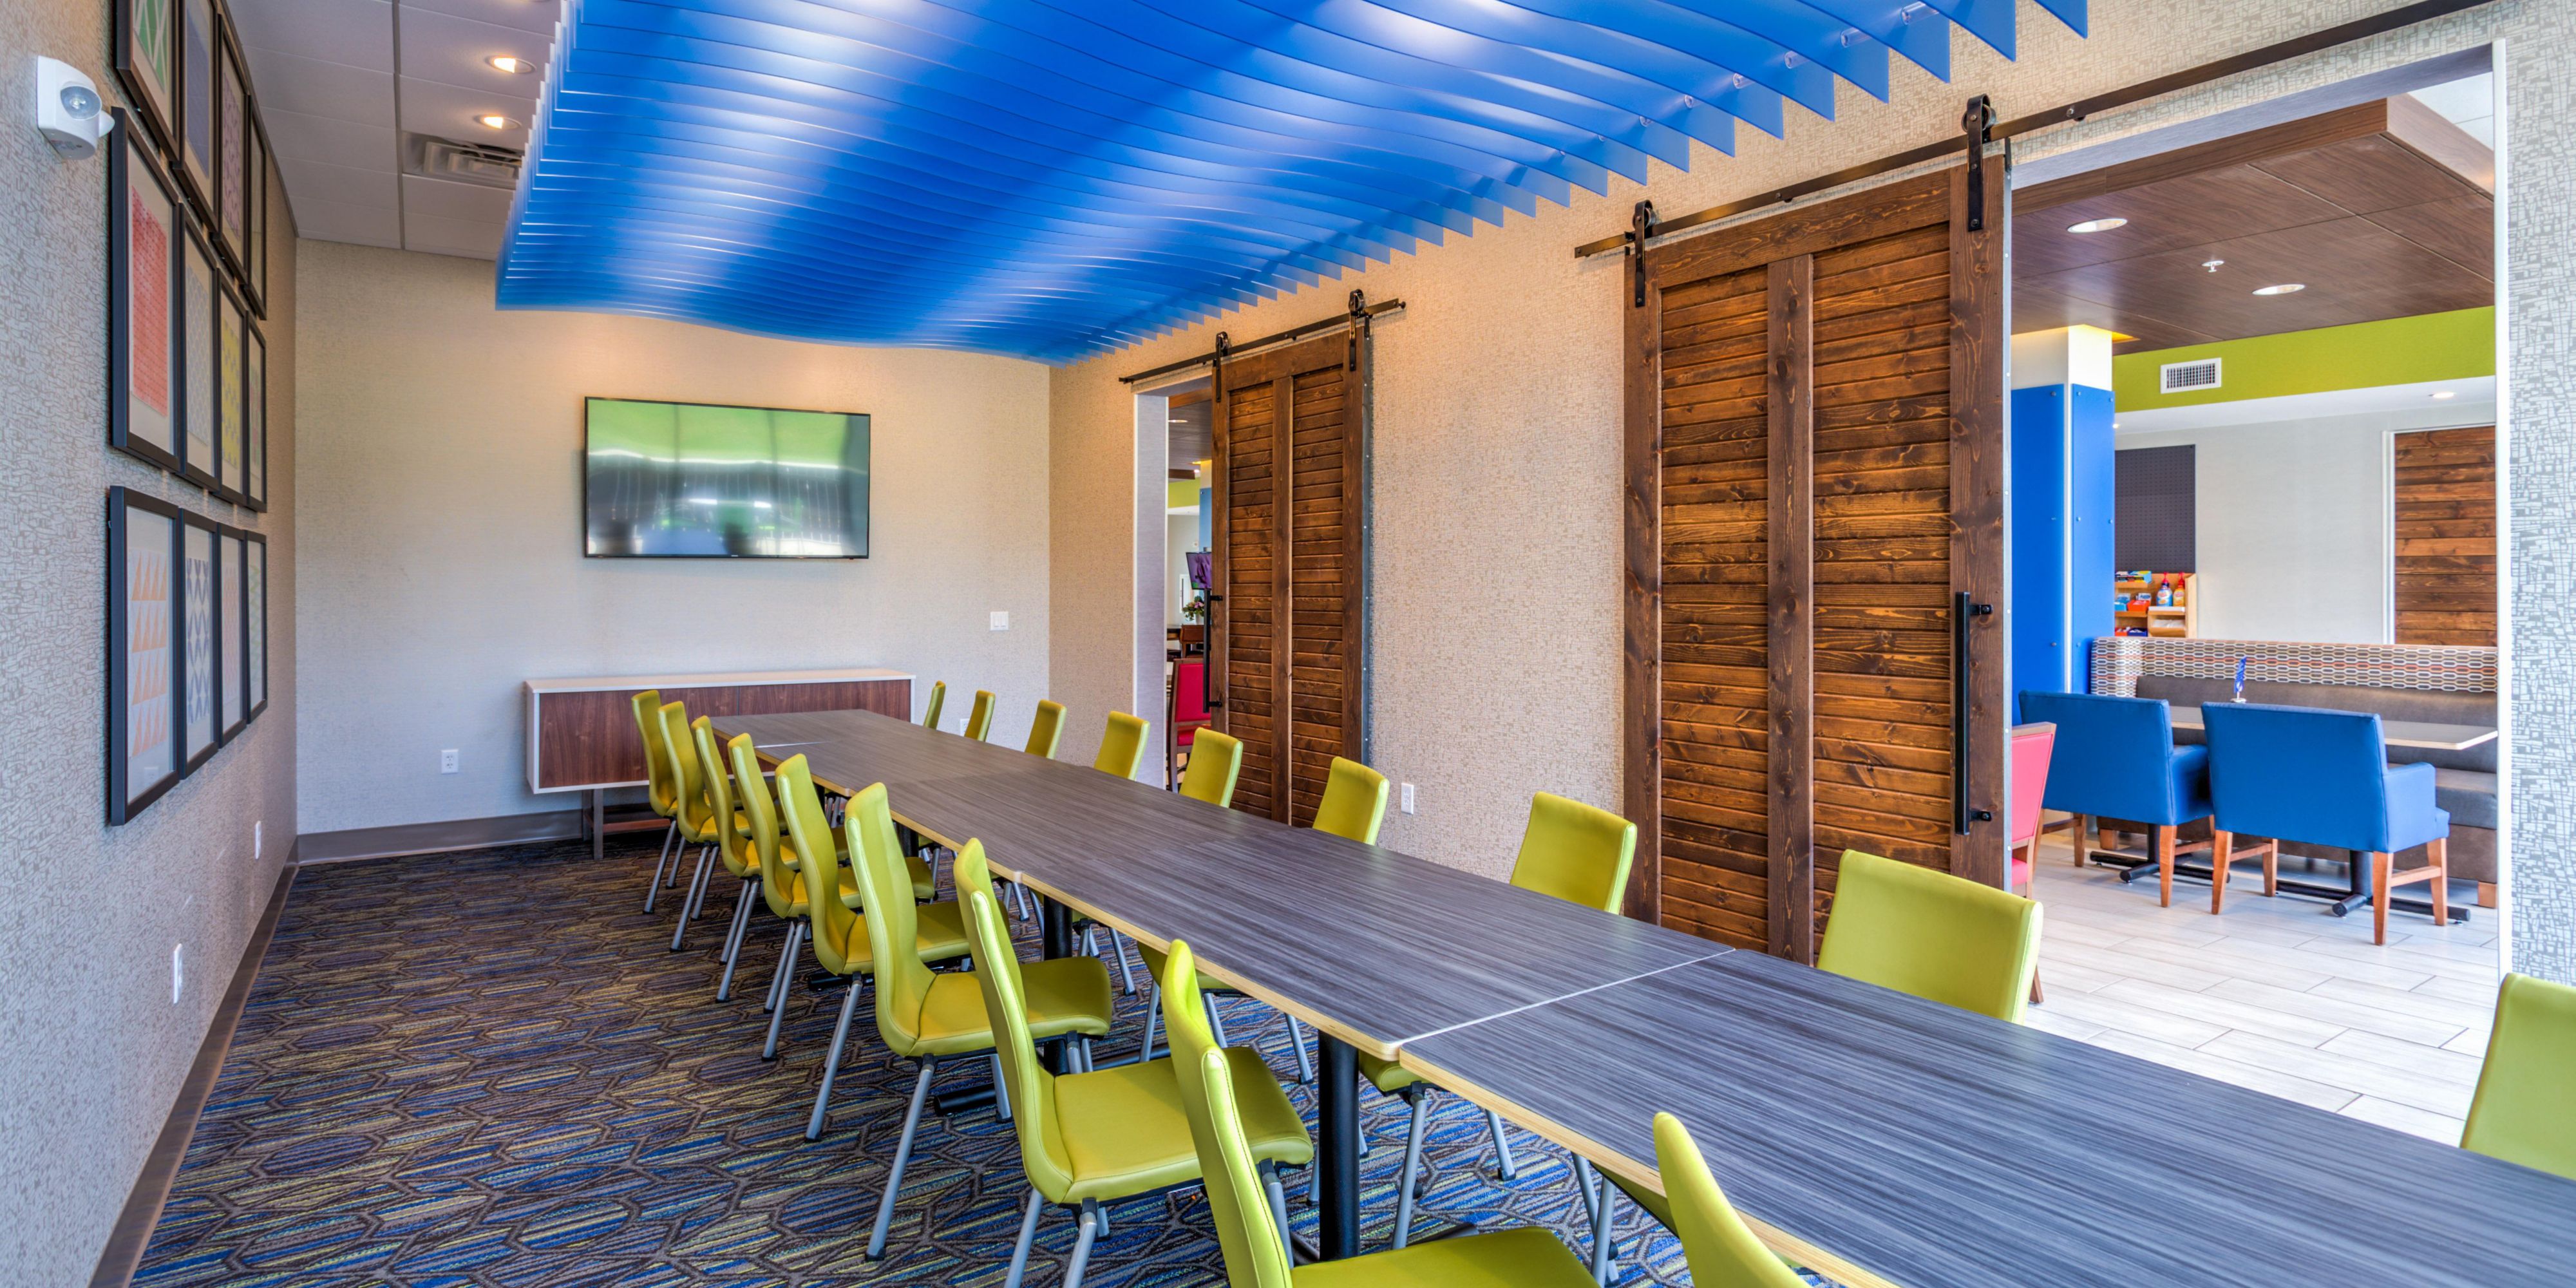 We have two meeting spaces to accommodate your corporate meetings, family gatherings, and any other gathering needs. Reach out today to learn how we can take care of you!